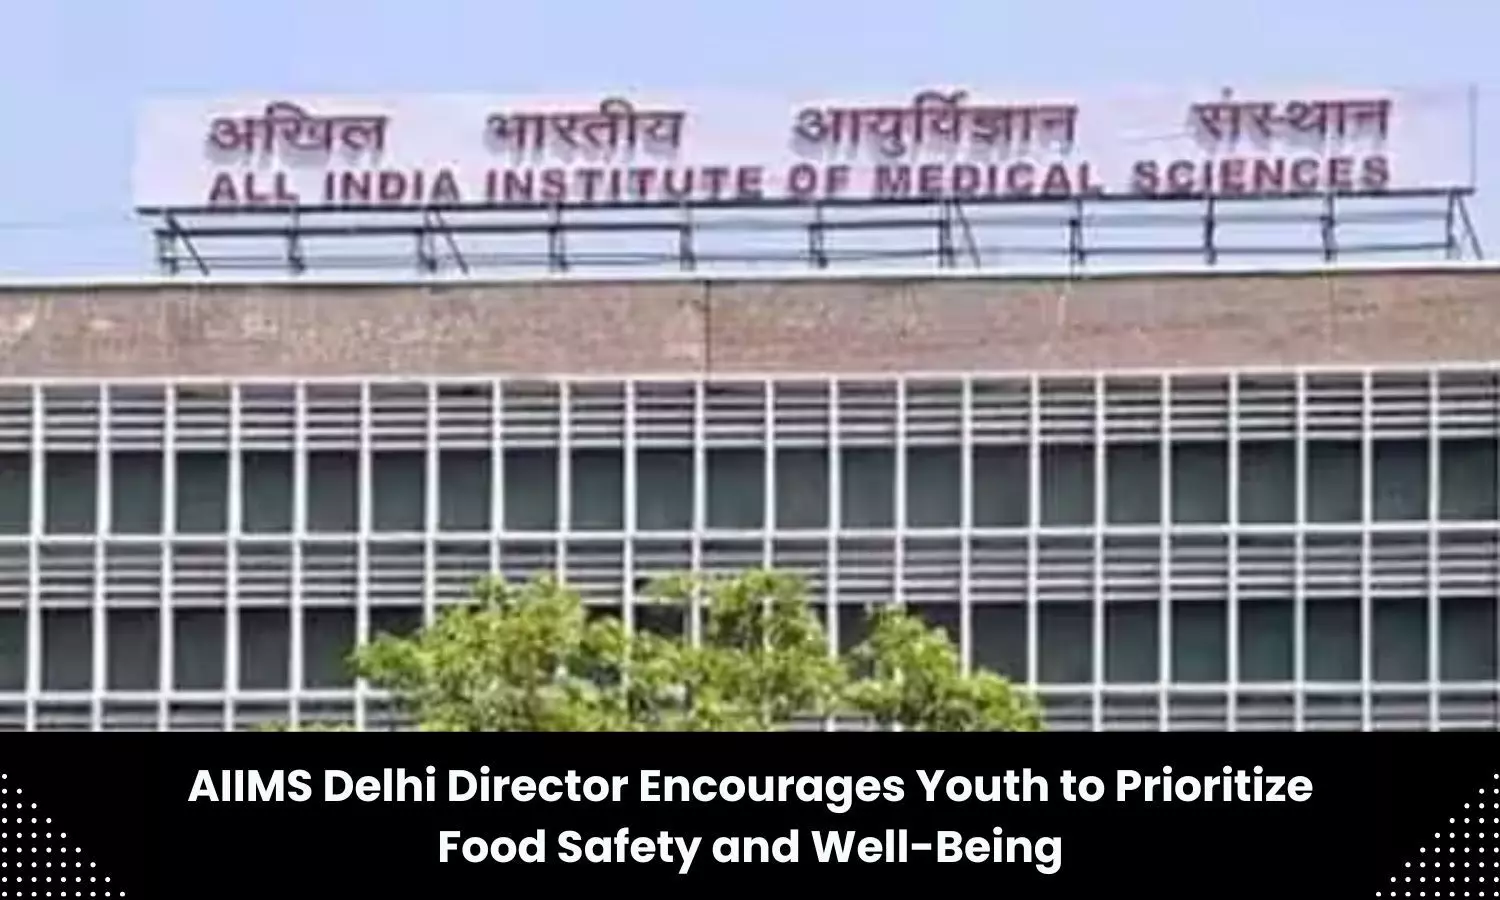 Focus on food safety, overall well being: Delhi AIIMS Director urges youth